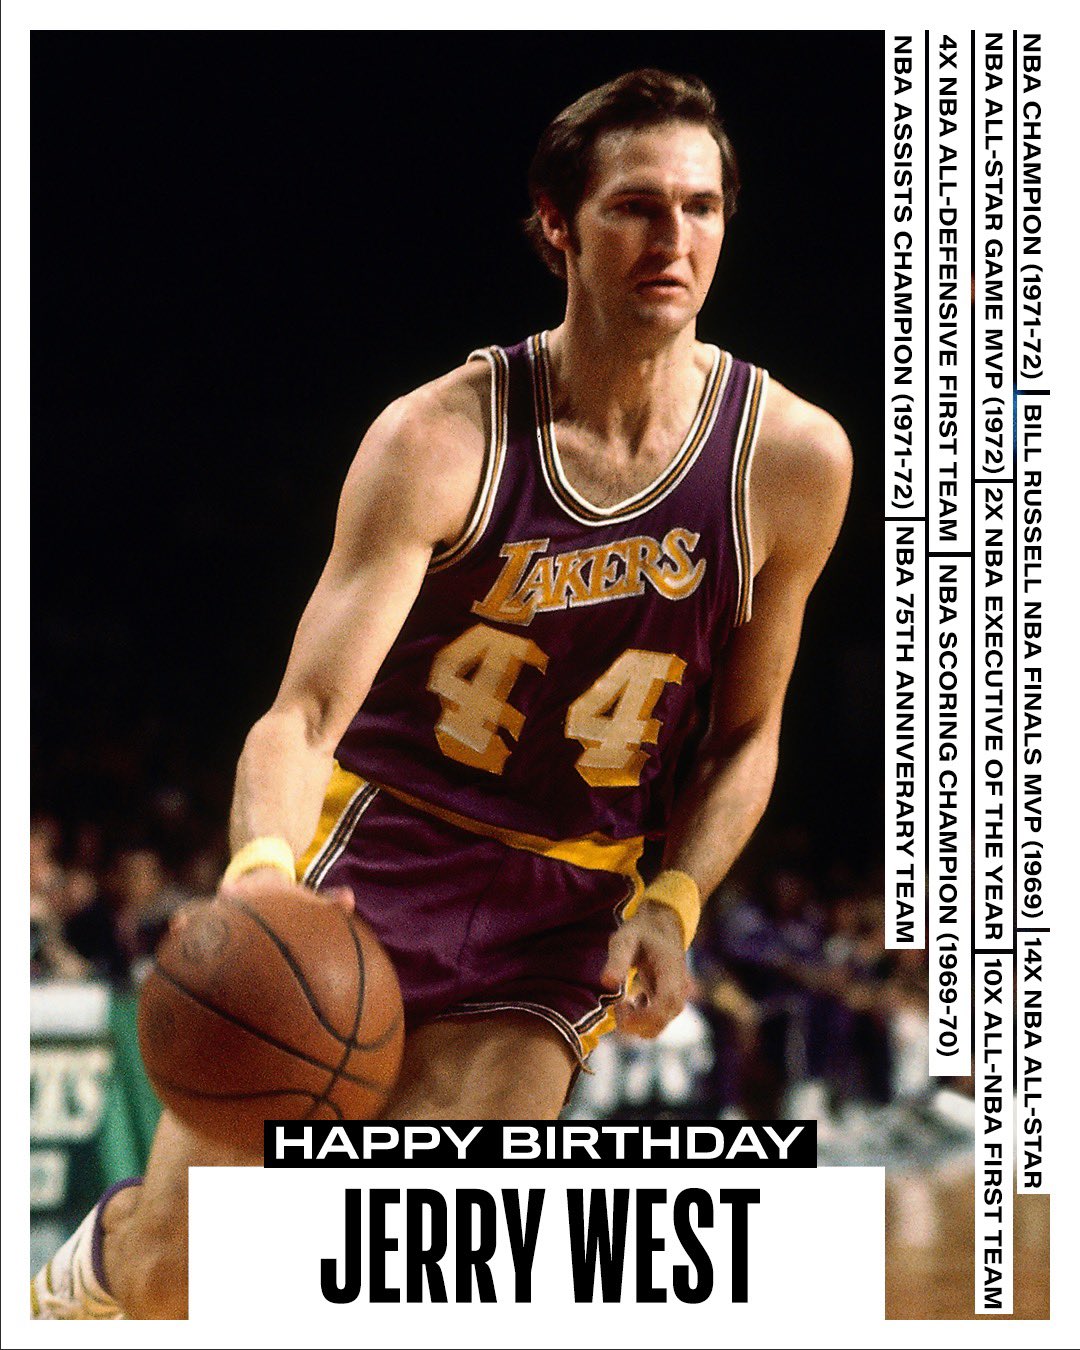 28. The 75th Anniversary Of The NBA